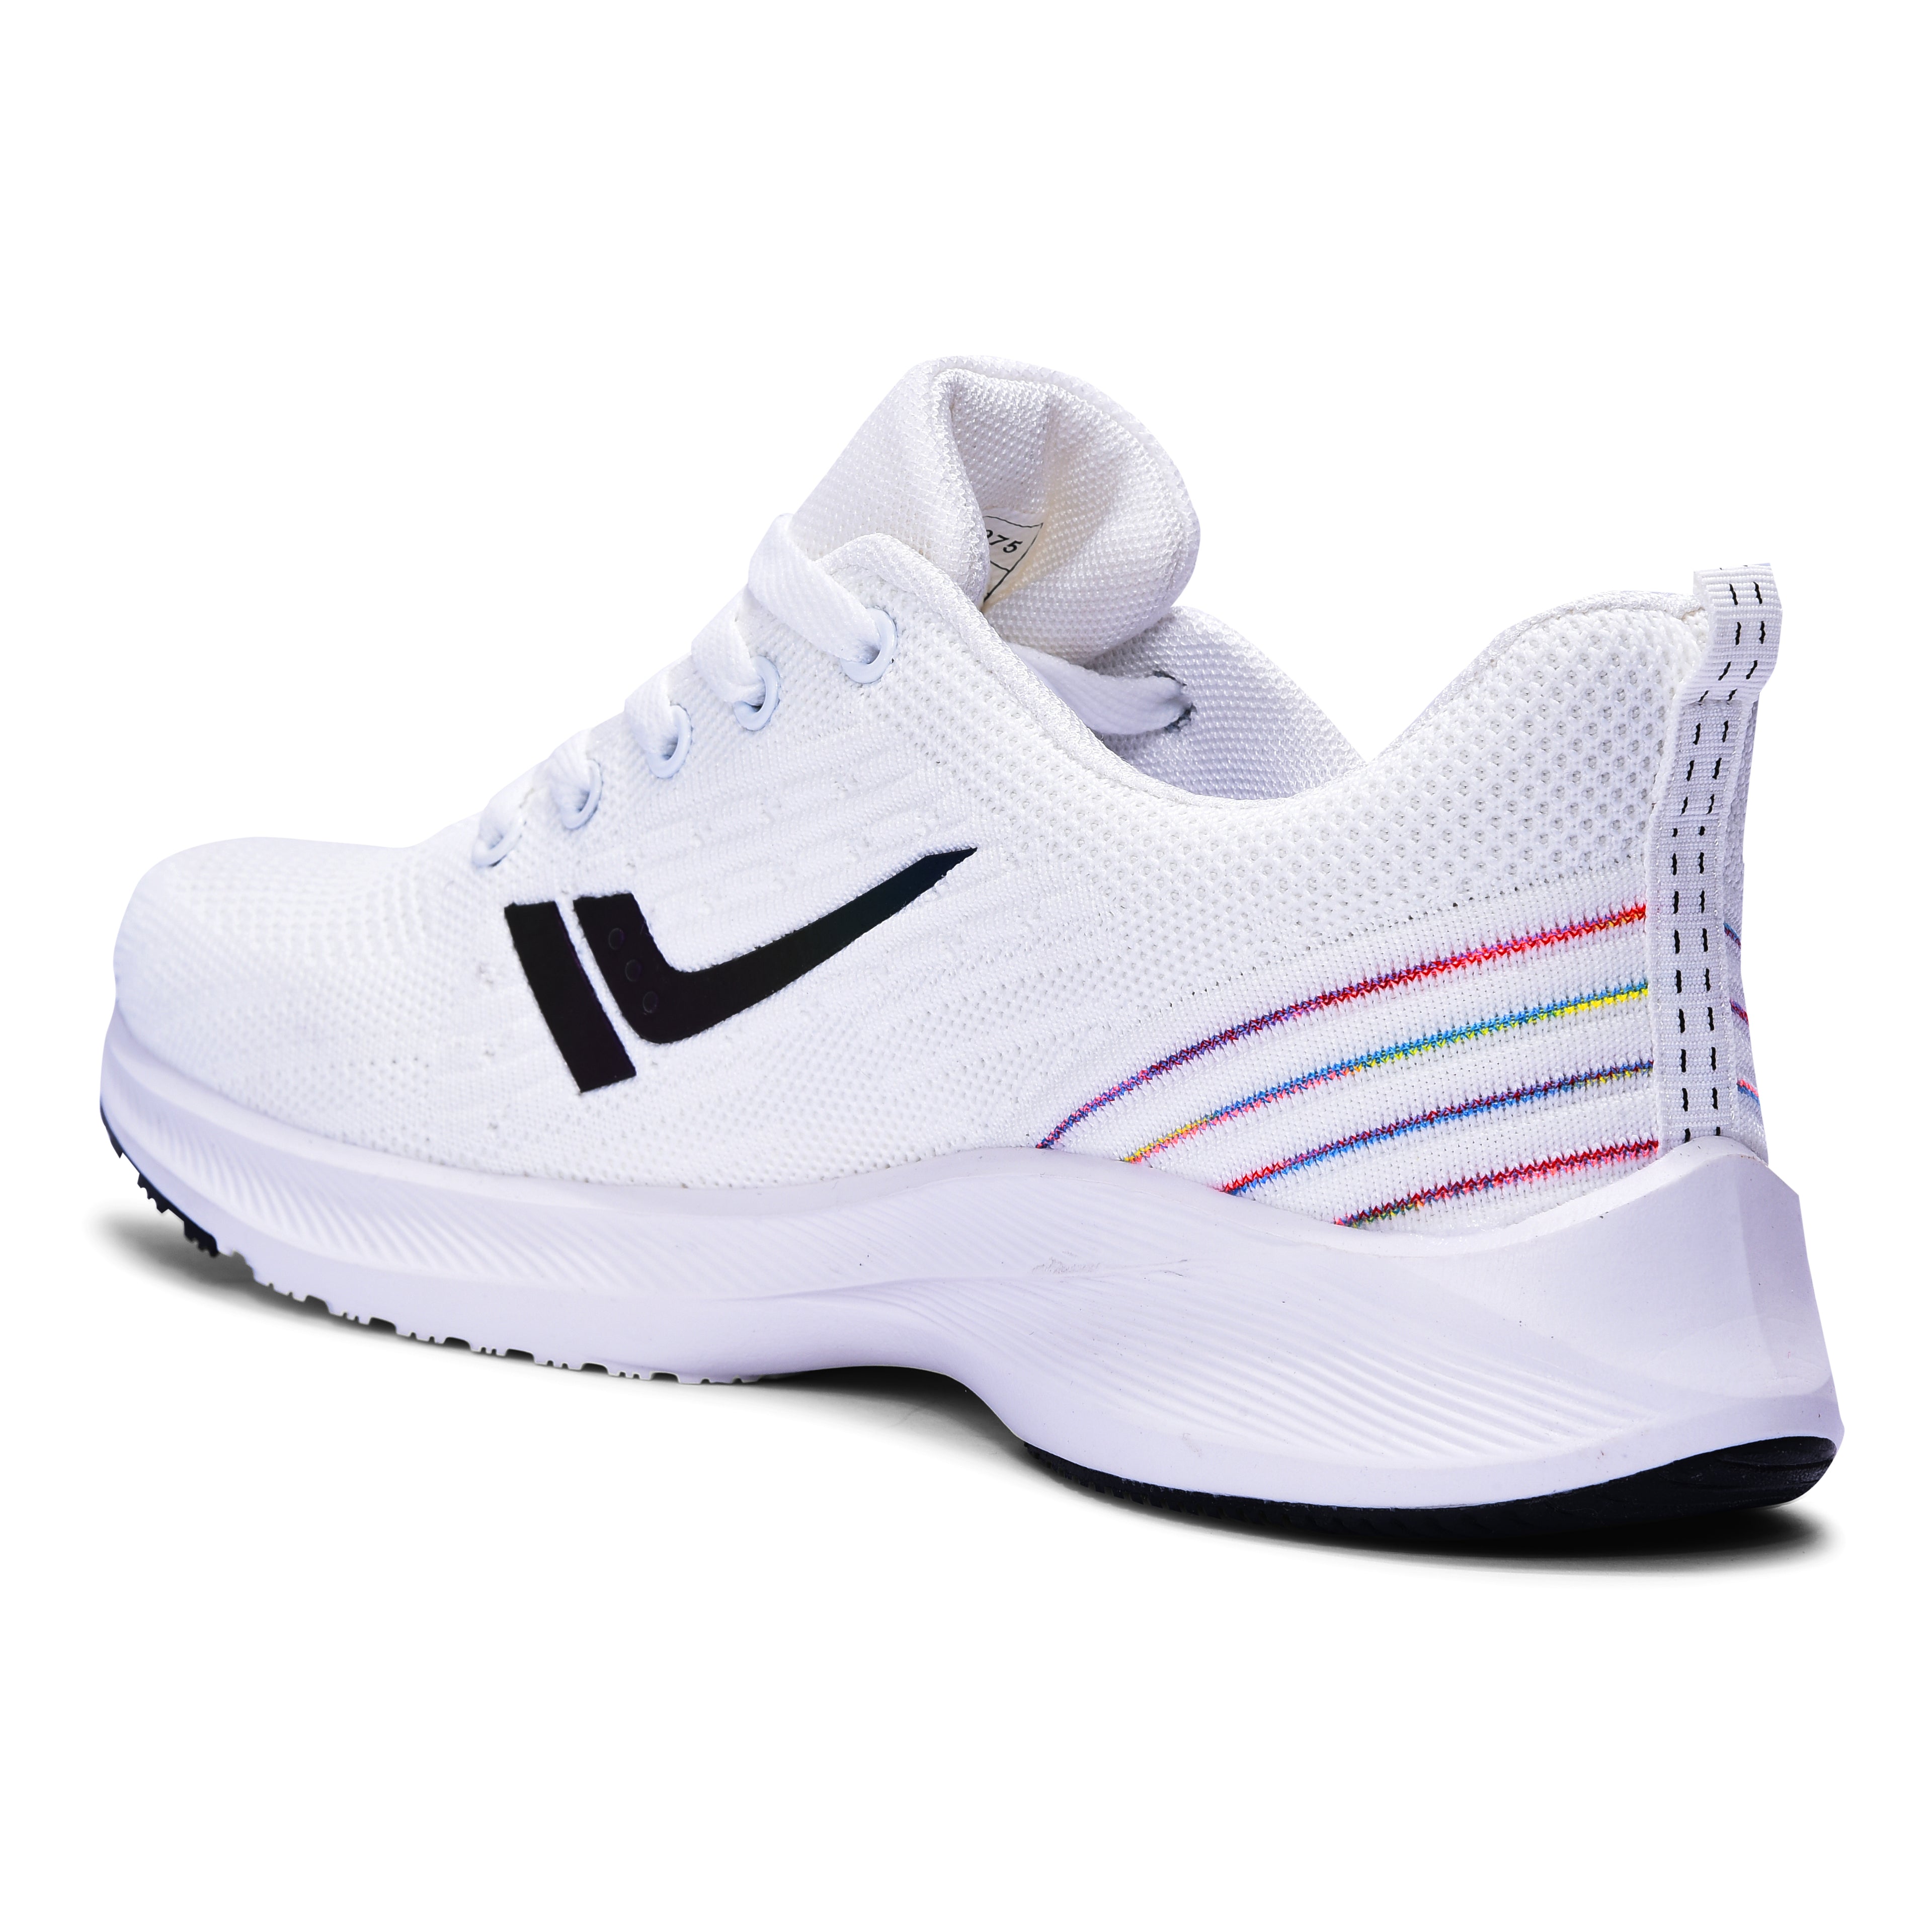 Calcetto CLT-0975 White Running Shoe For Men